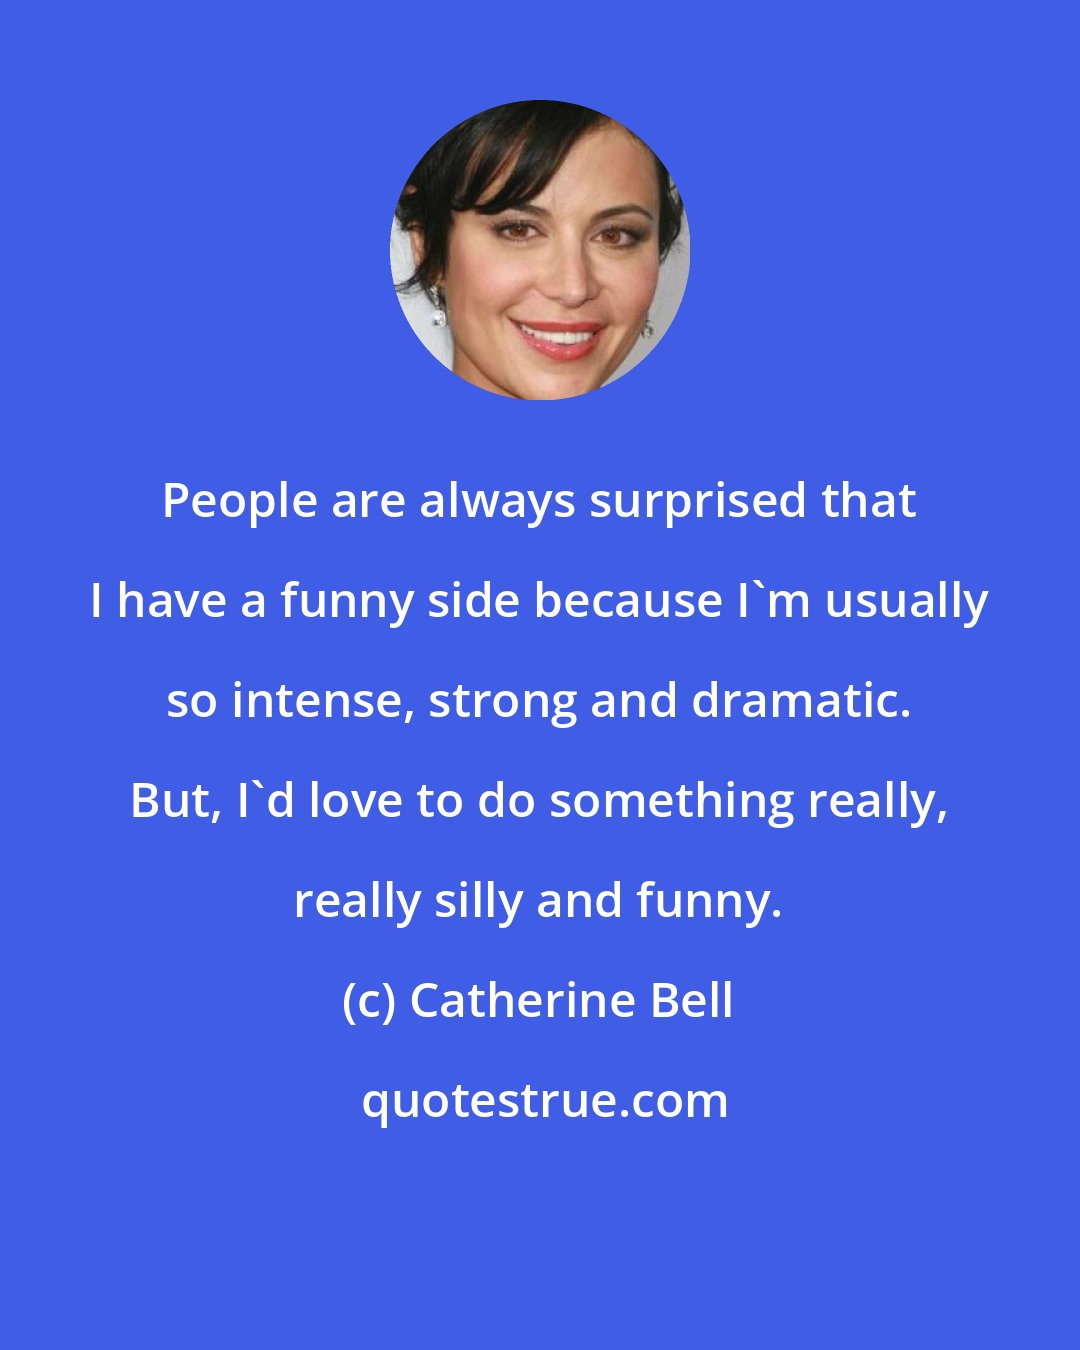 Catherine Bell: People are always surprised that I have a funny side because I'm usually so intense, strong and dramatic. But, I'd love to do something really, really silly and funny.